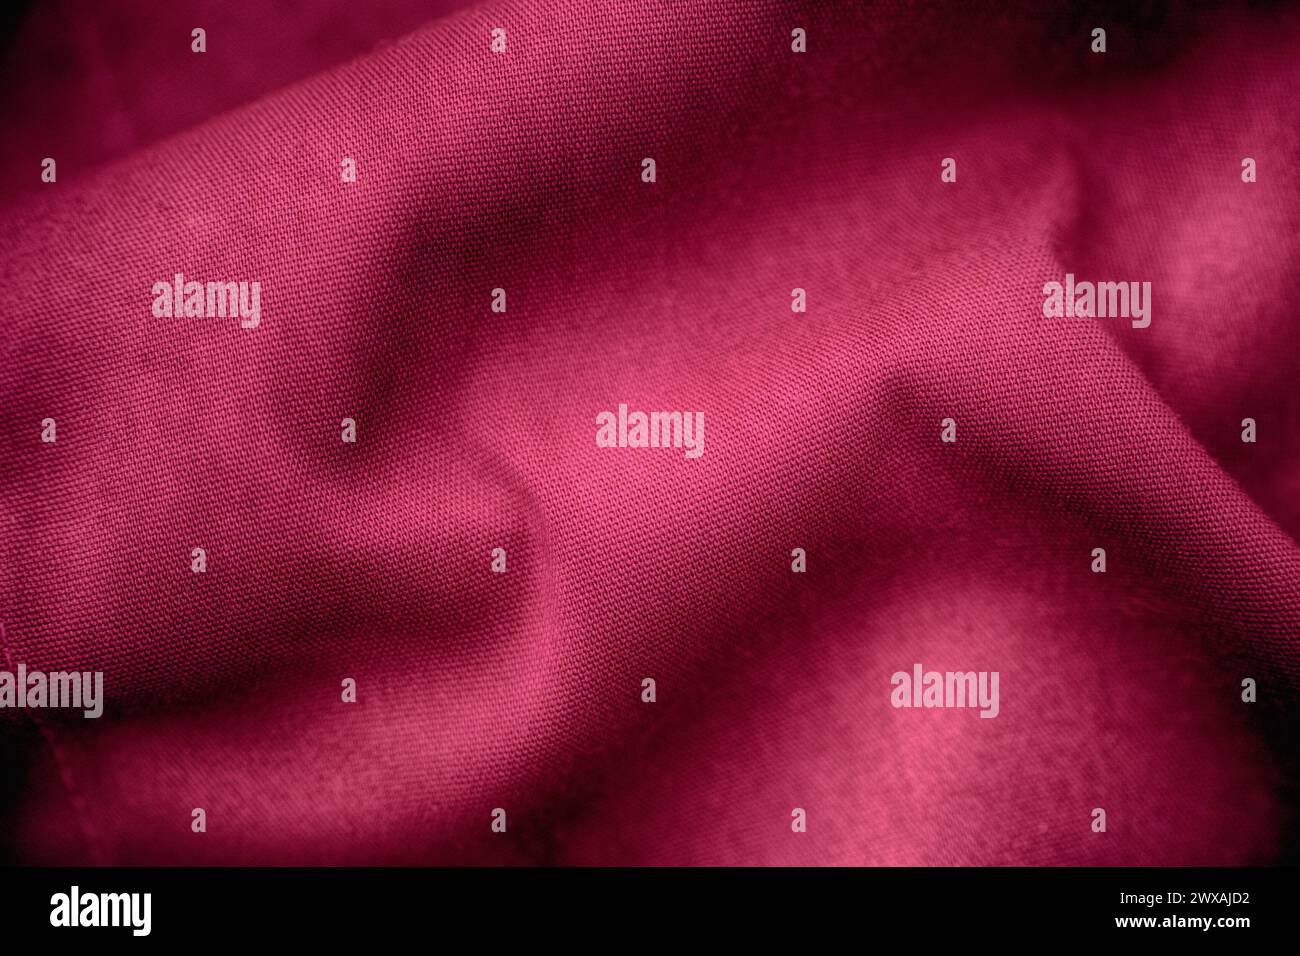 A crumpled magenta fabric texture background. Close up. Stock Photo